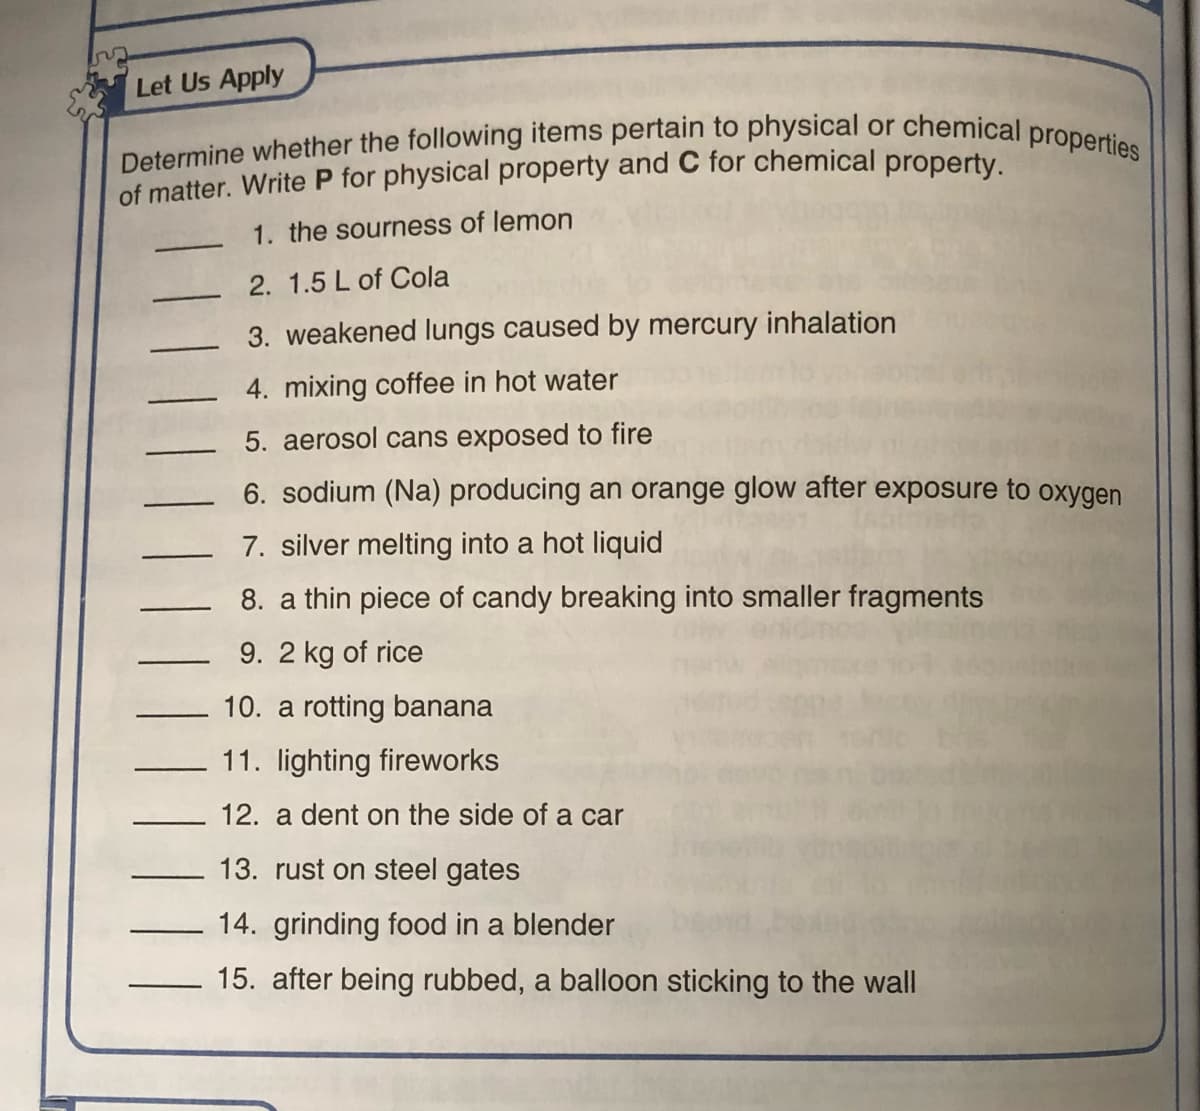 Determine whether the following items pertain to physical or chemical properties
Let Us Apply
of matter. Write P for physical property and C for chemical property.
1. the sourness of lemon
2. 1.5 L of Cola
3. weakened lungs caused by mercury inhalation
4. mixing coffee in hot water
5. aerosol cans exposed to fire
6. sodium (Na) producing an orange glow after exposure to oxygen
7. silver melting into a hot liquid
8. a thin piece of candy breaking into smaller fragments
9. 2 kg of rice
10. a rotting banana
11. lighting fireworks
12. a dent on the side of a car
13. rust on steel gates
14. grinding food in a blender
15. after being rubbed, a balloon sticking to the wall
